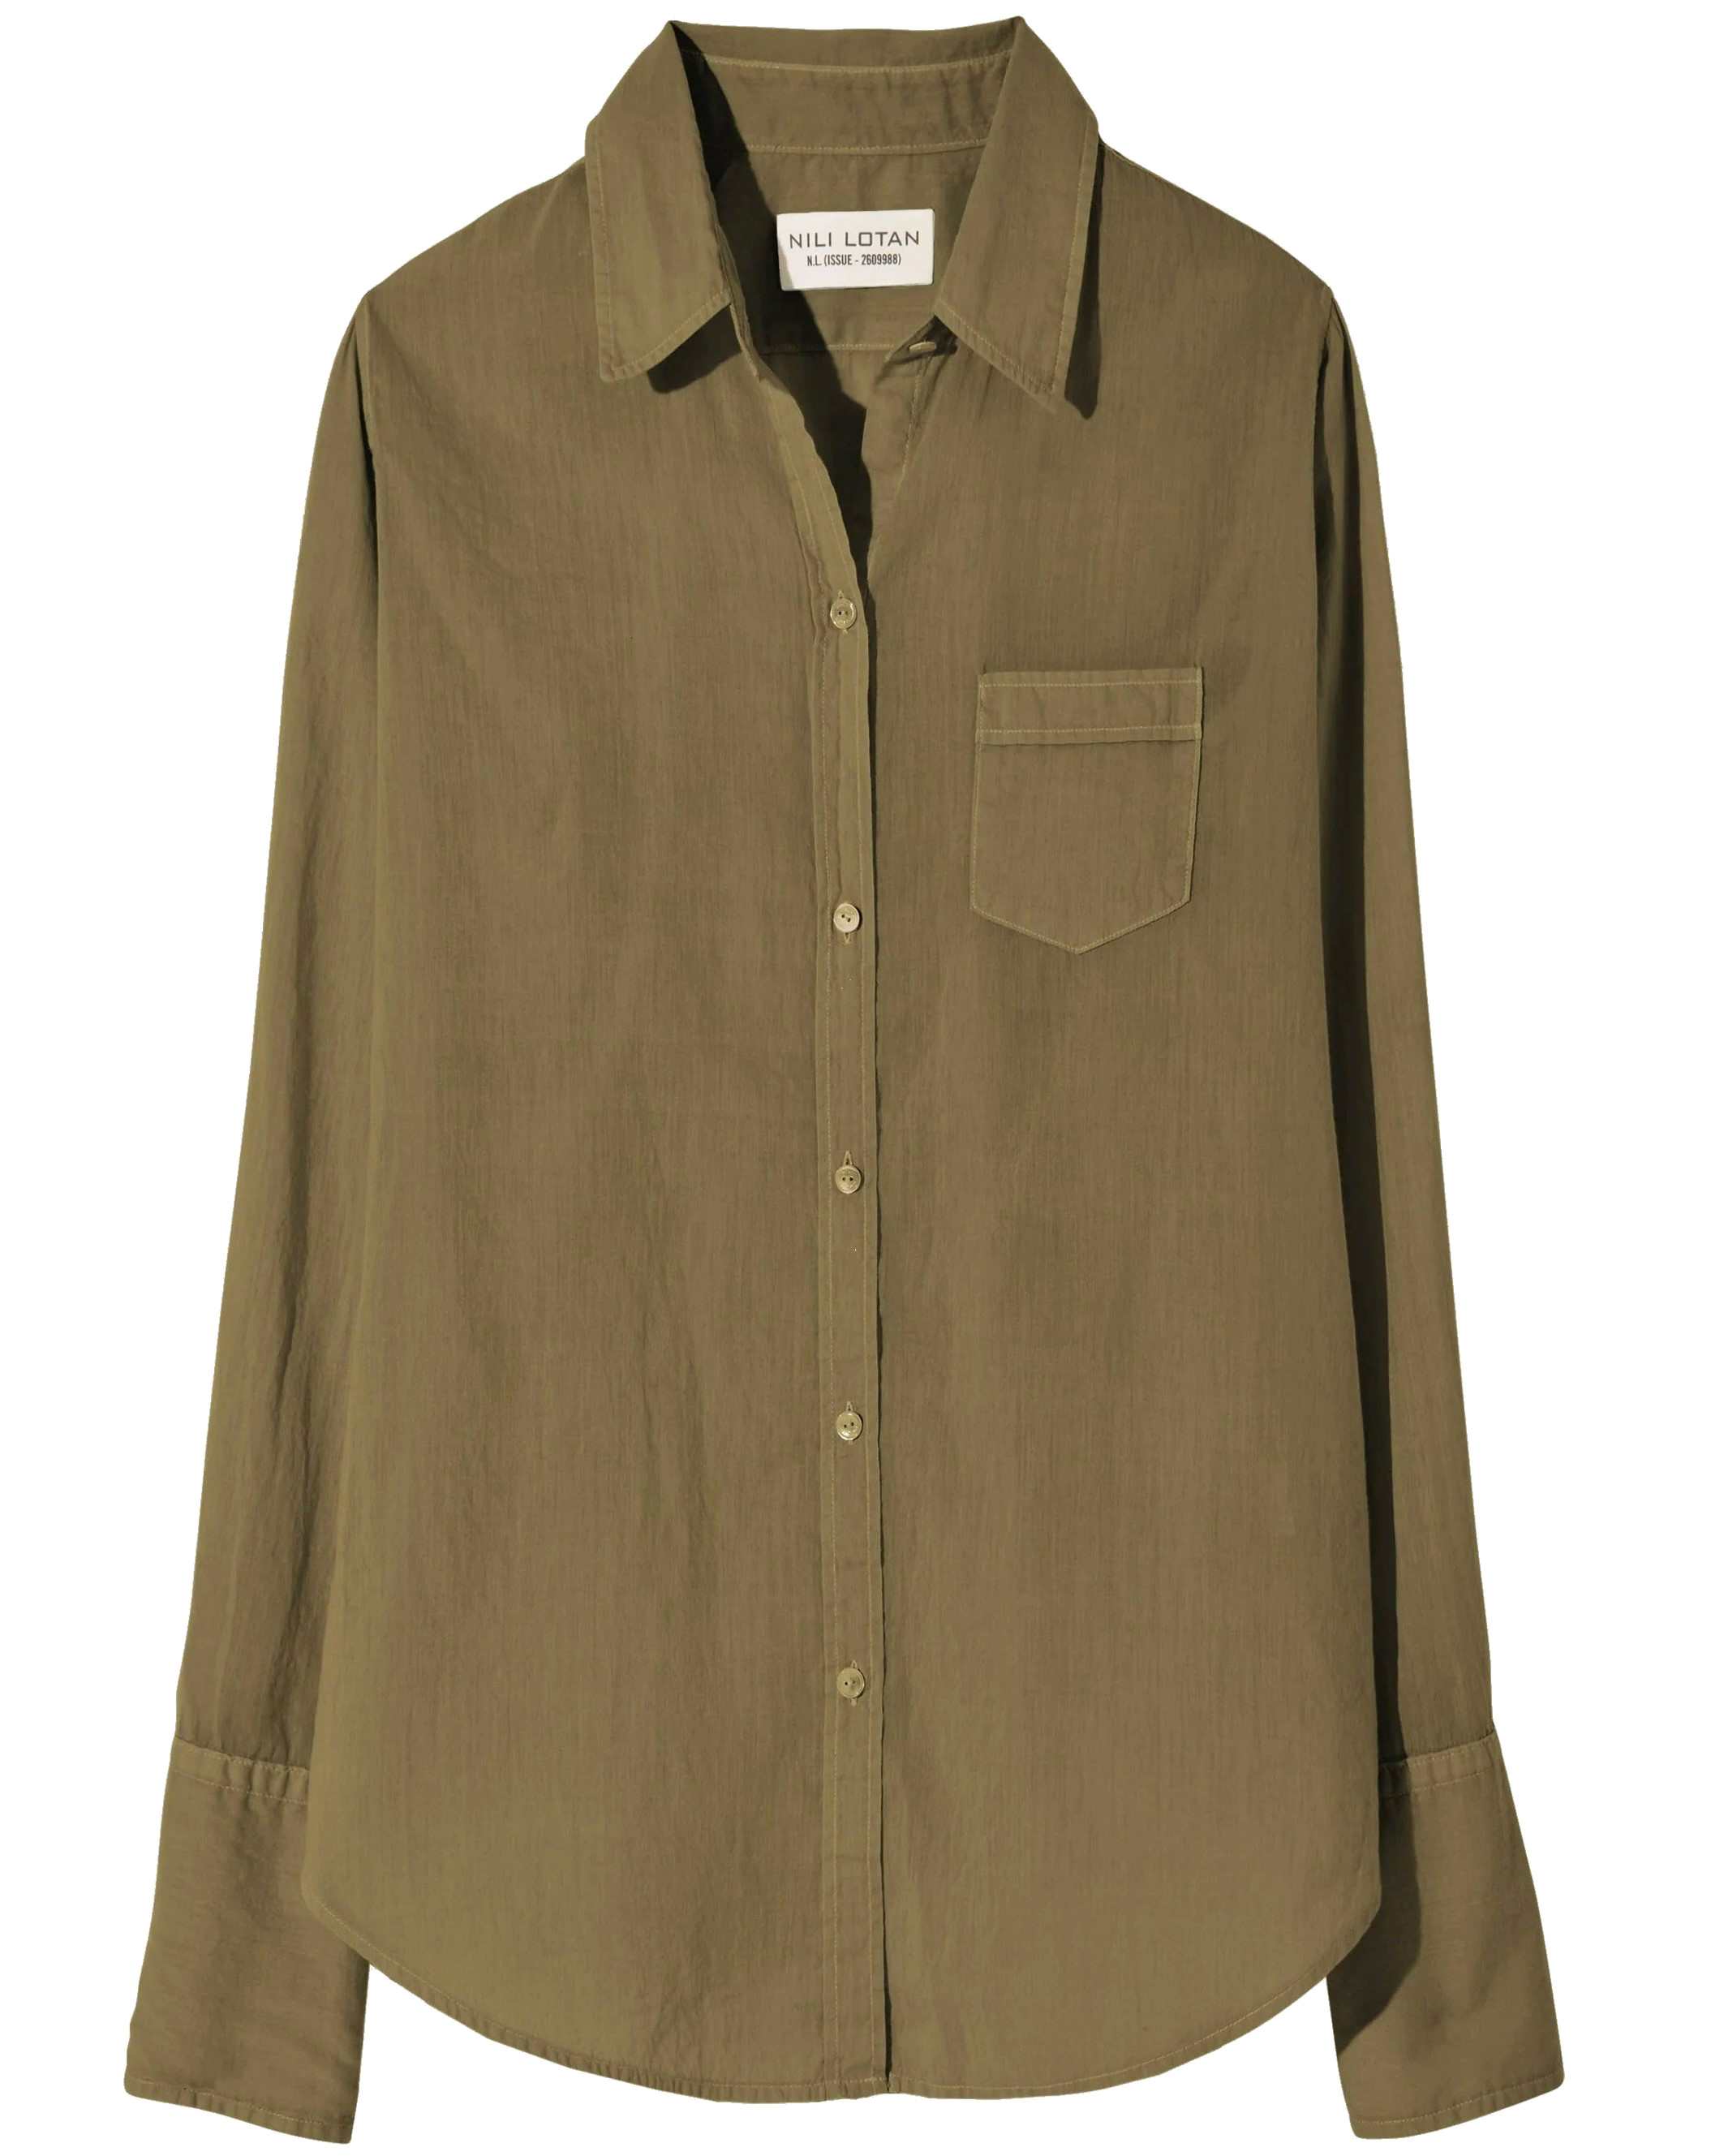 NILI LOTAN Cotton Voile NL Shirt in Olive Green XS